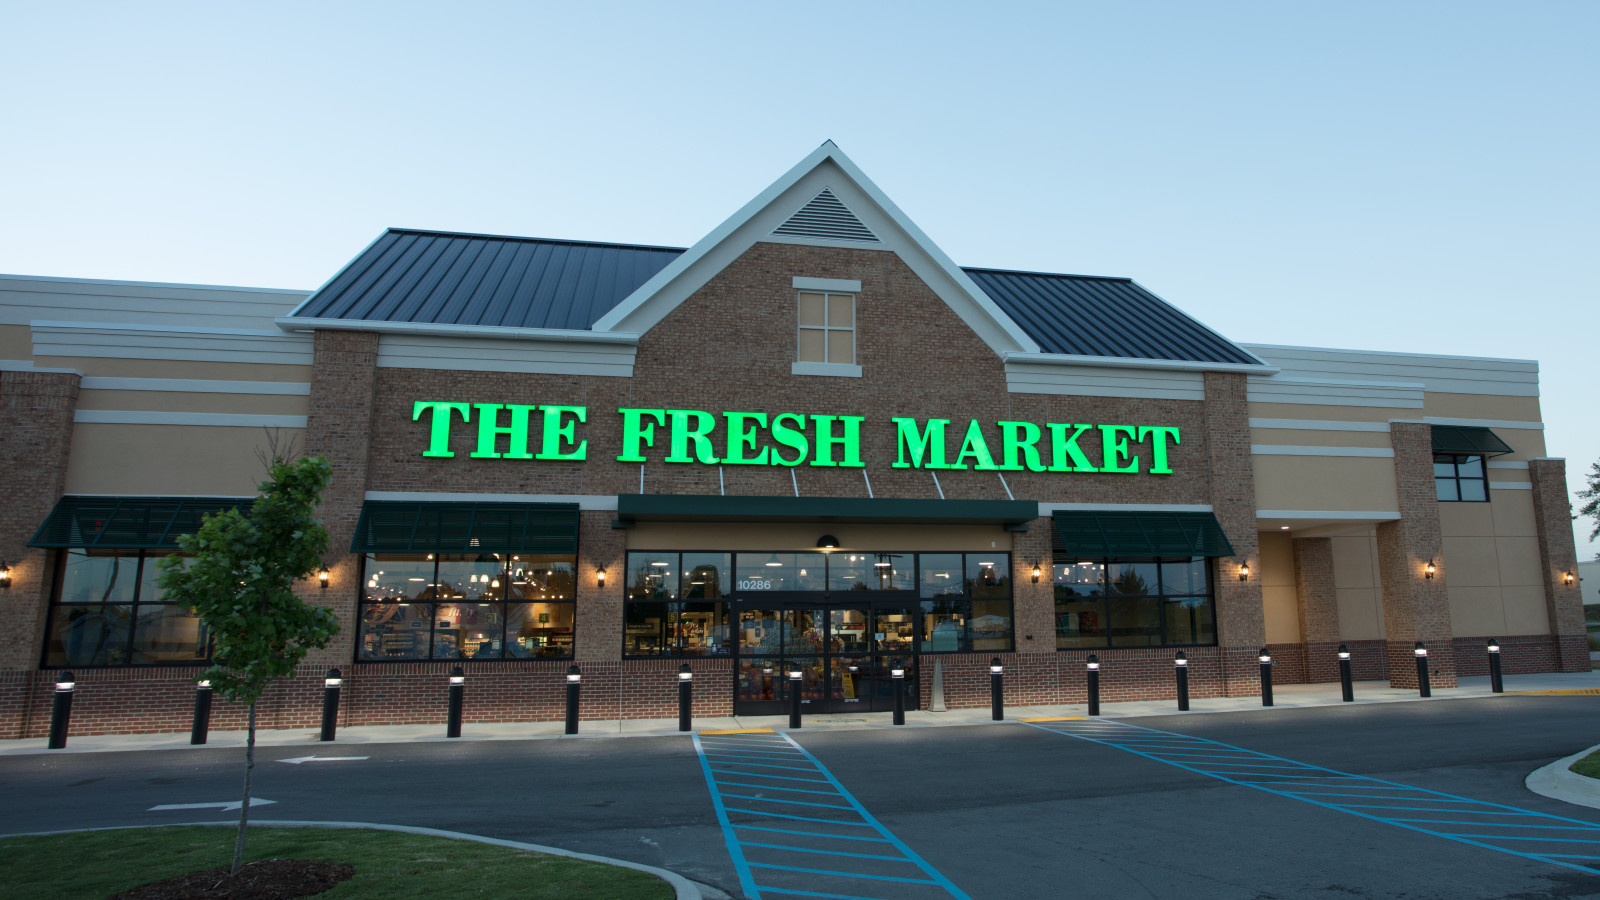 The Fresh Market - Eat fresh and save when you shop our Fresh